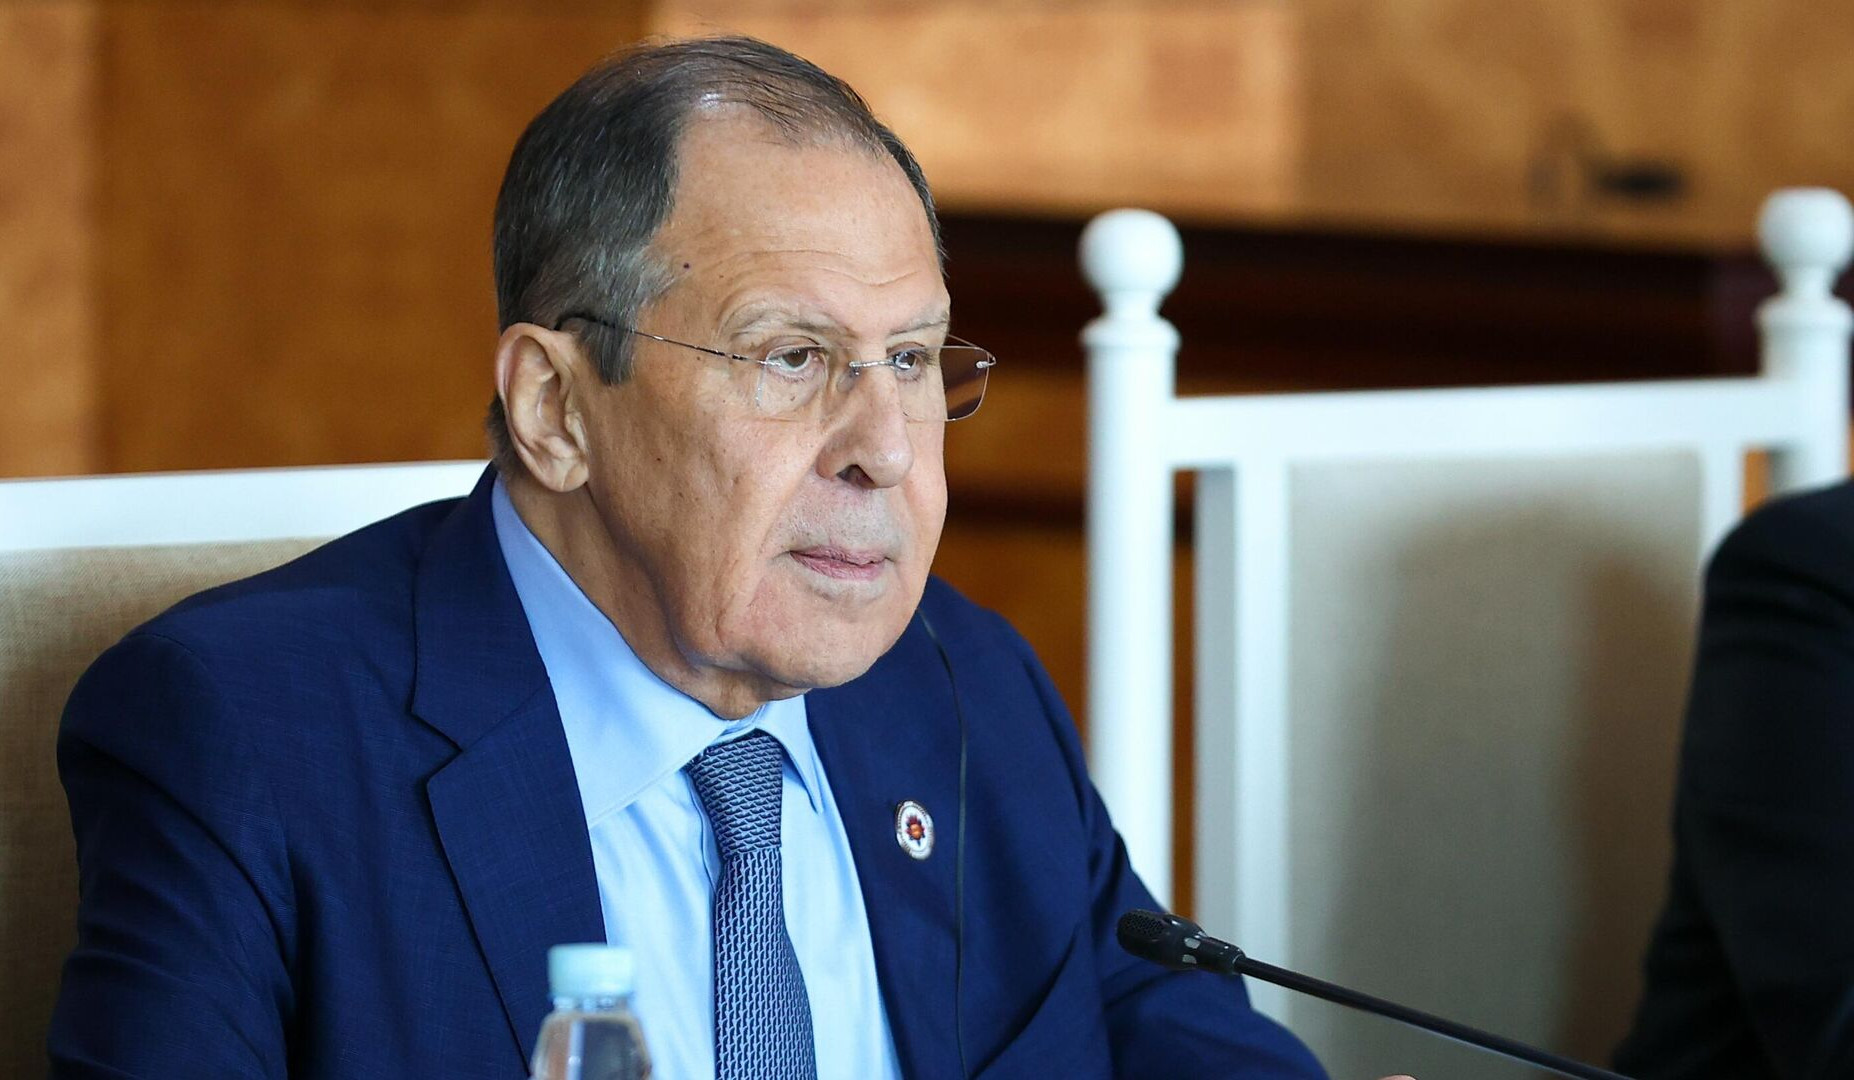 No need for Russia to close borders, punish EU citizens over ‘Schengen walls’, Lavrov